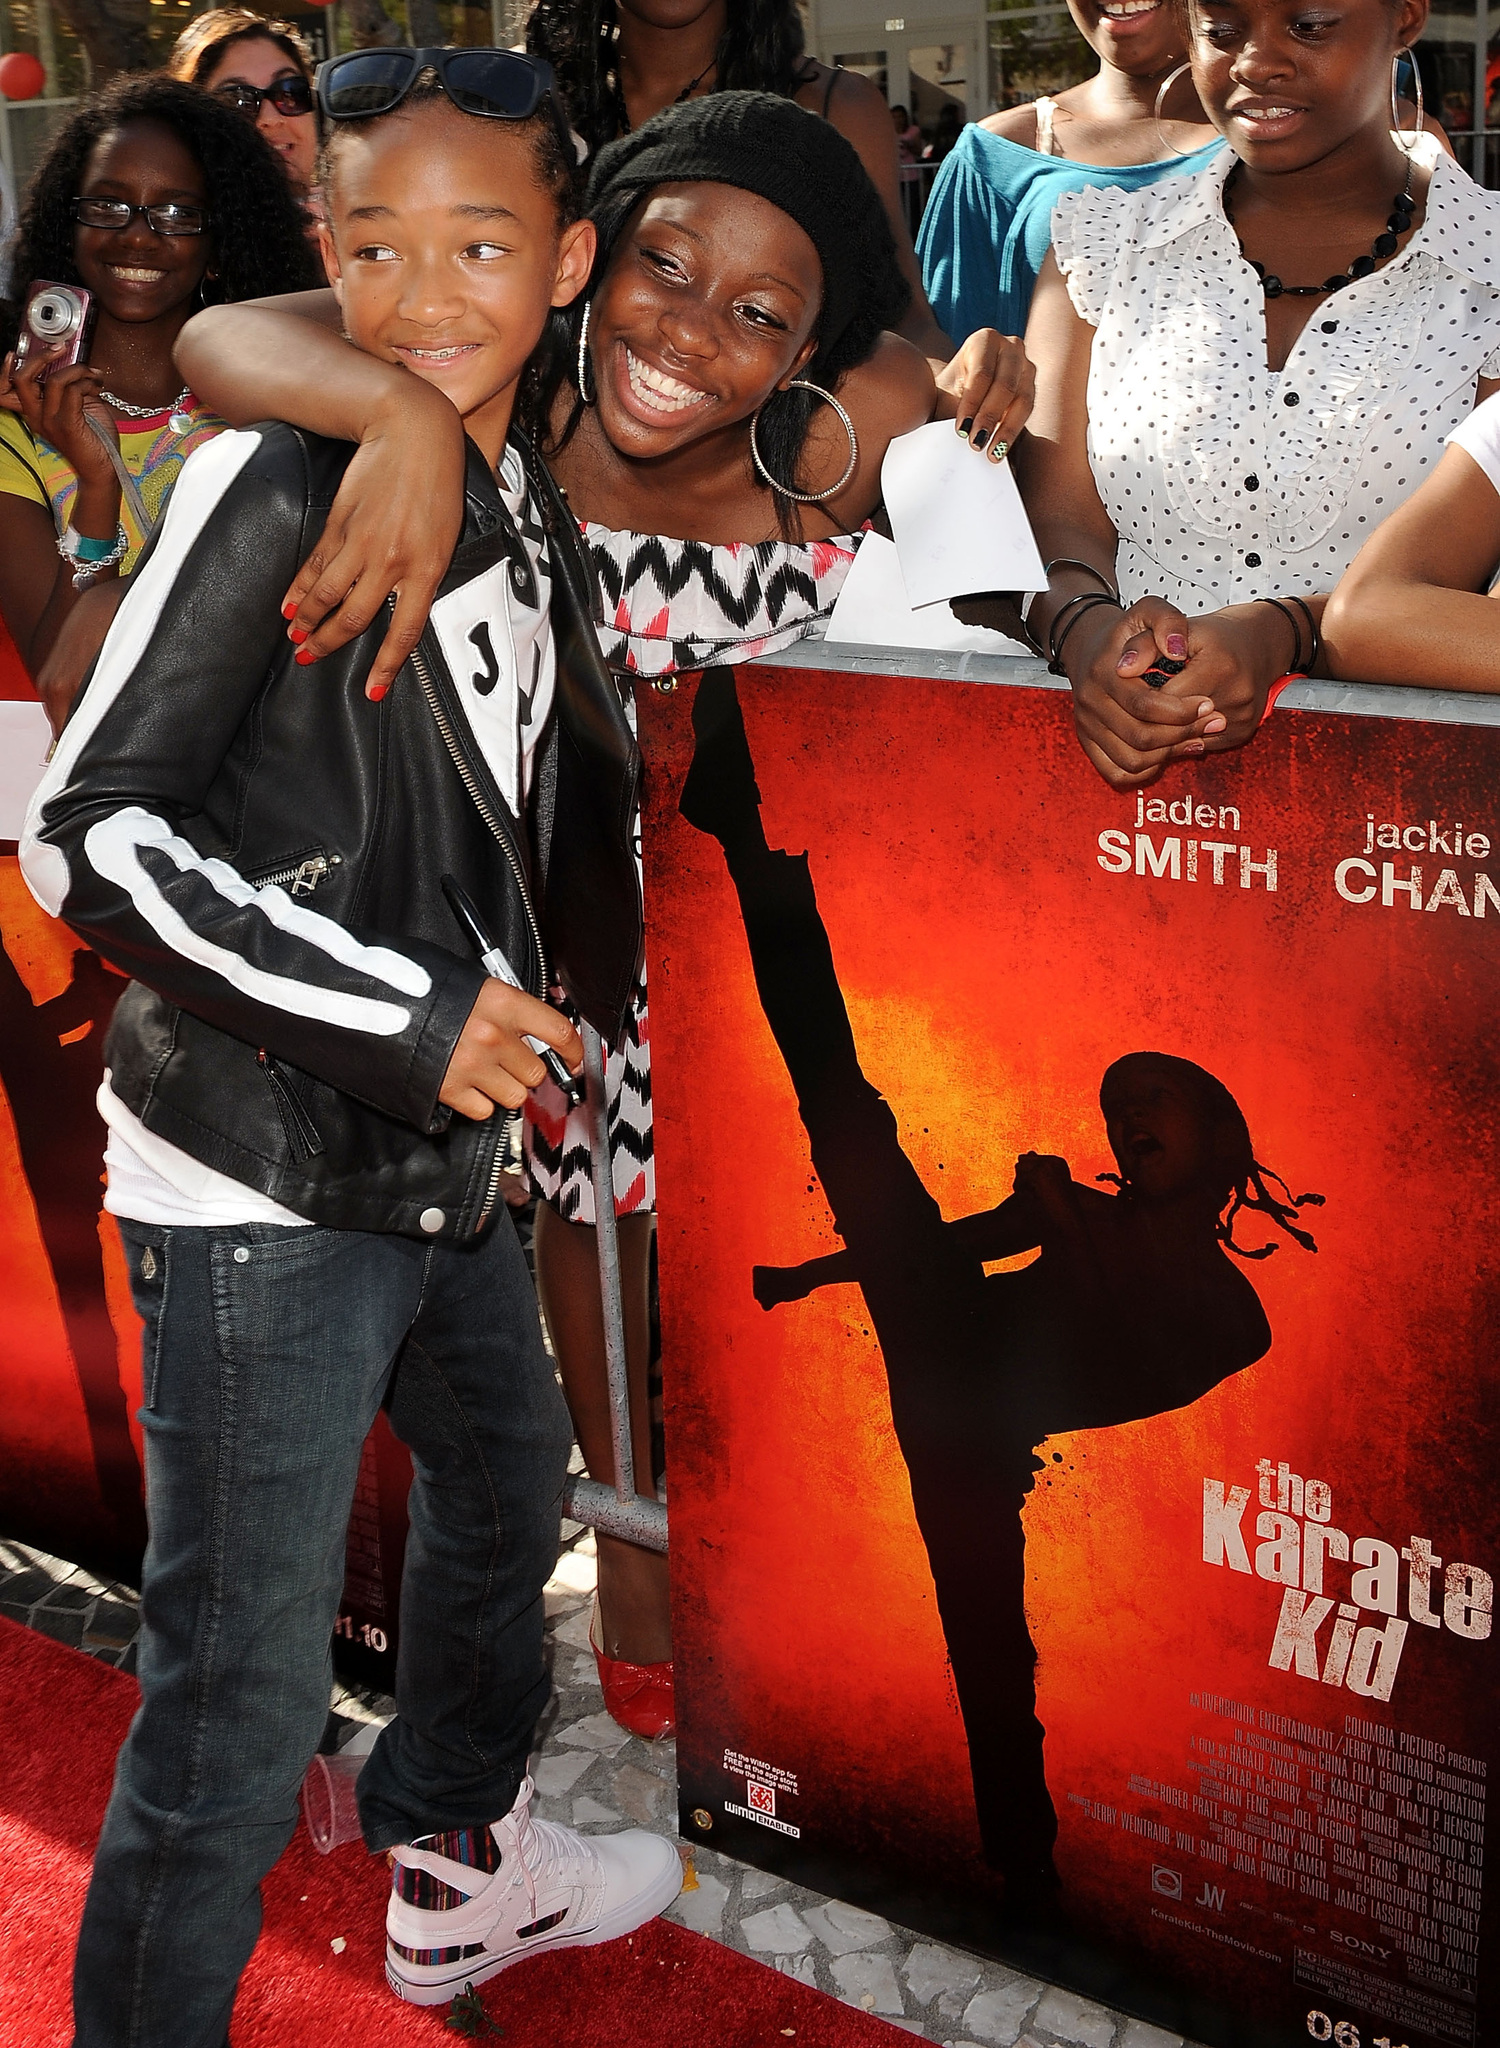 Jaden Smith at event of The Karate Kid (2010)